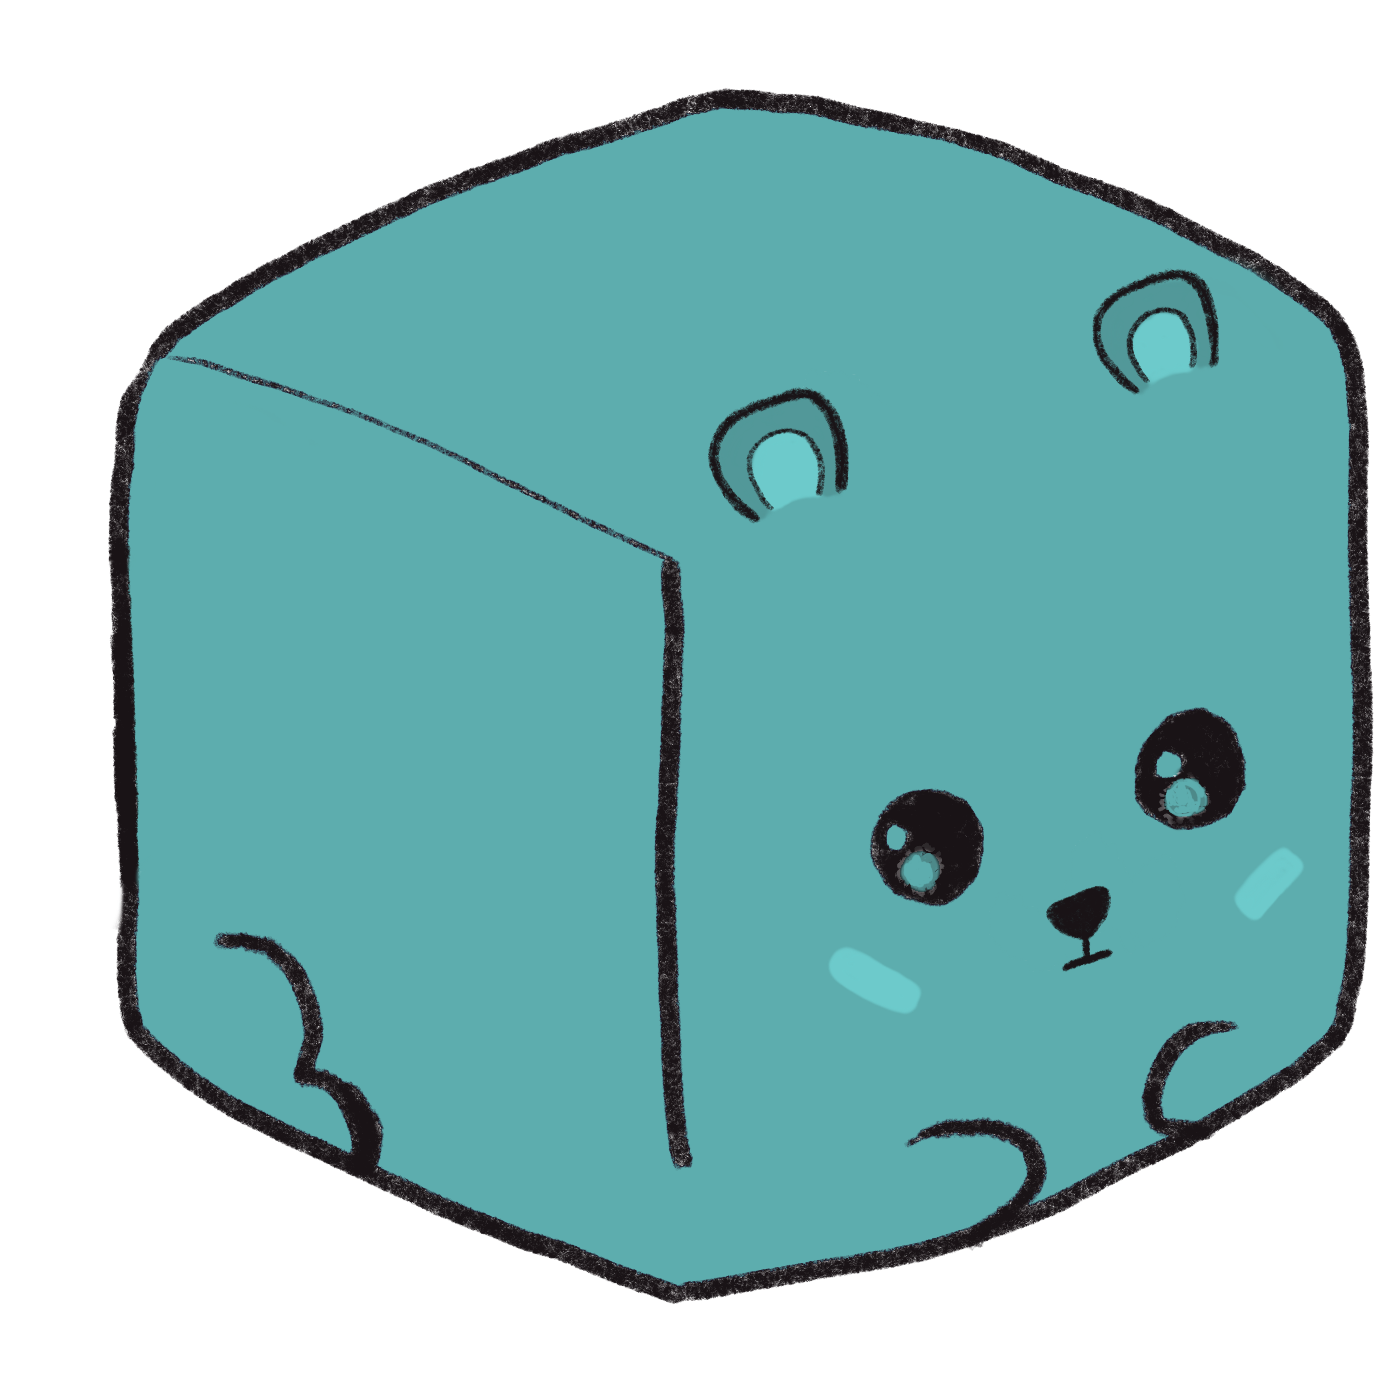 It's a teal cube cub, but like, the shade of teal was picked specifically to have the same redness as cube cat's shade of purple.